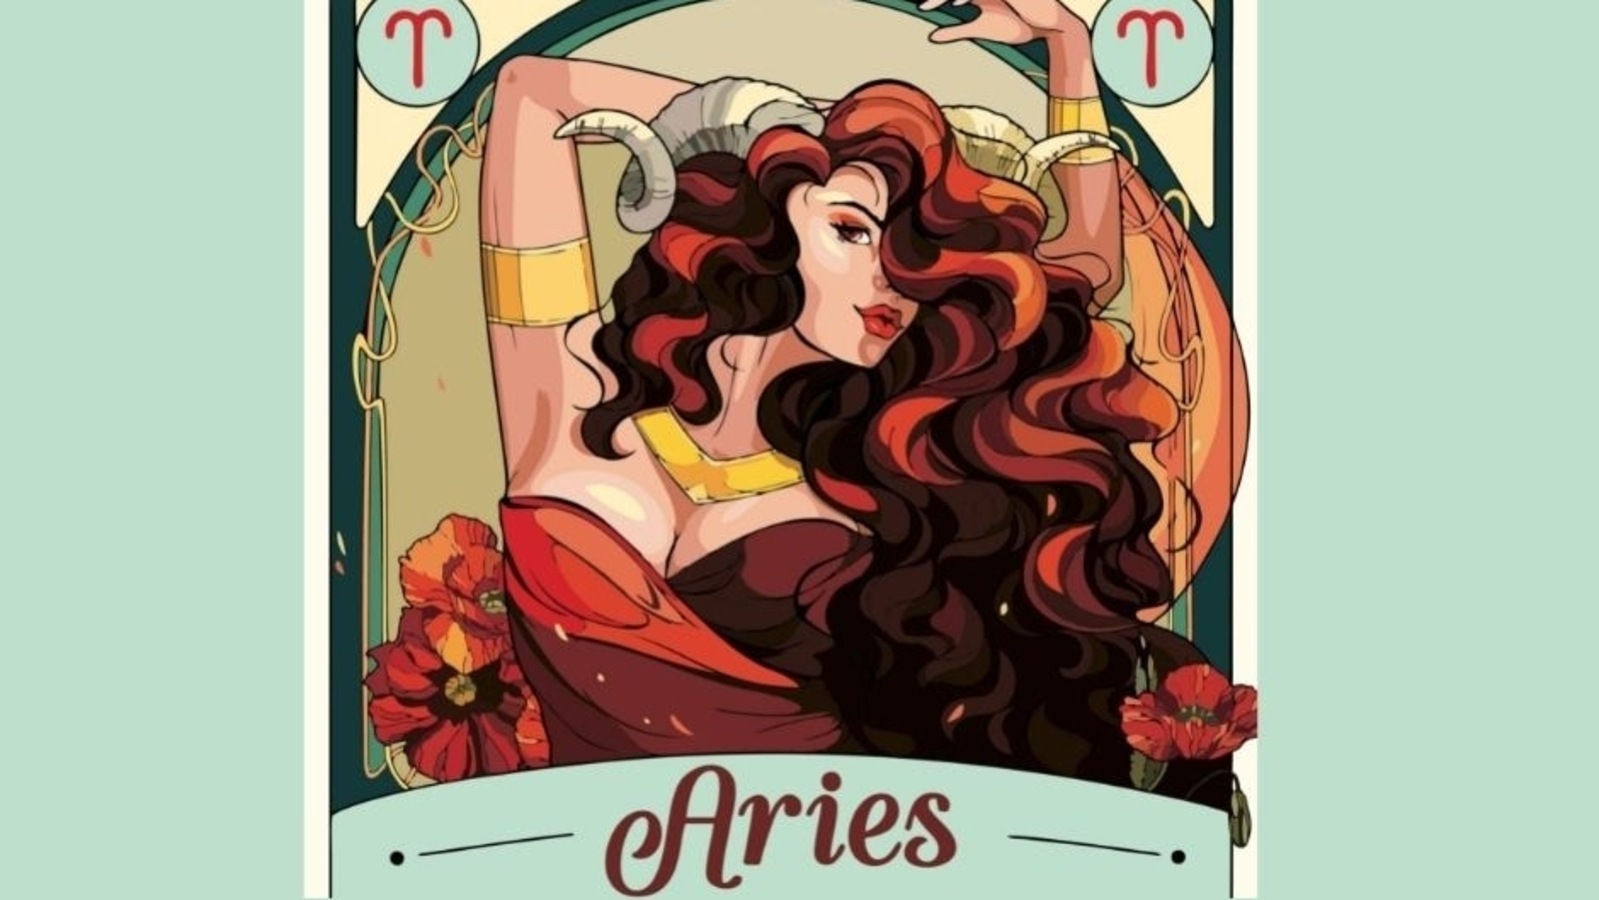 Aries Horoscope Today: Daily predictions for June 27,'22 states, work challenges